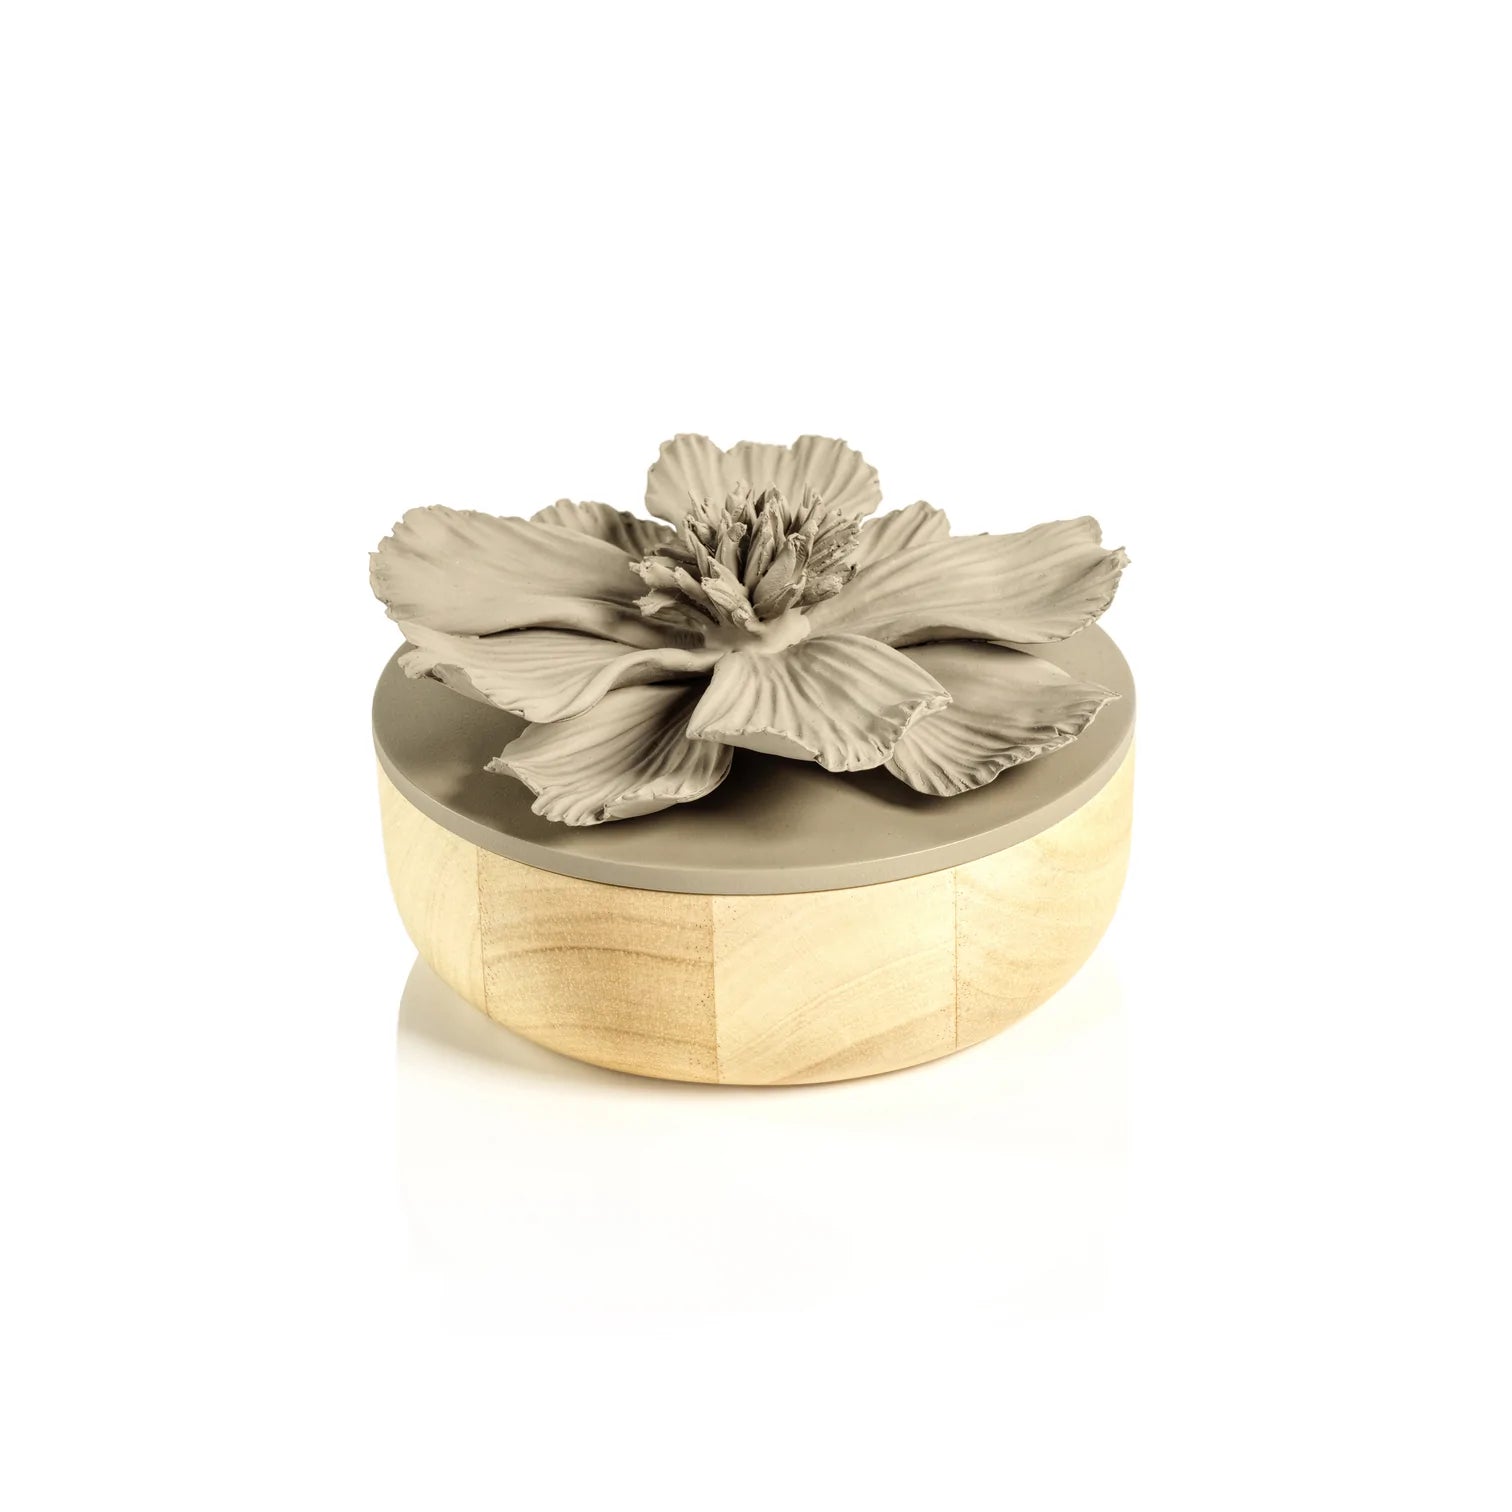 Cosmos Porcelain and Natural Wood Flower Box